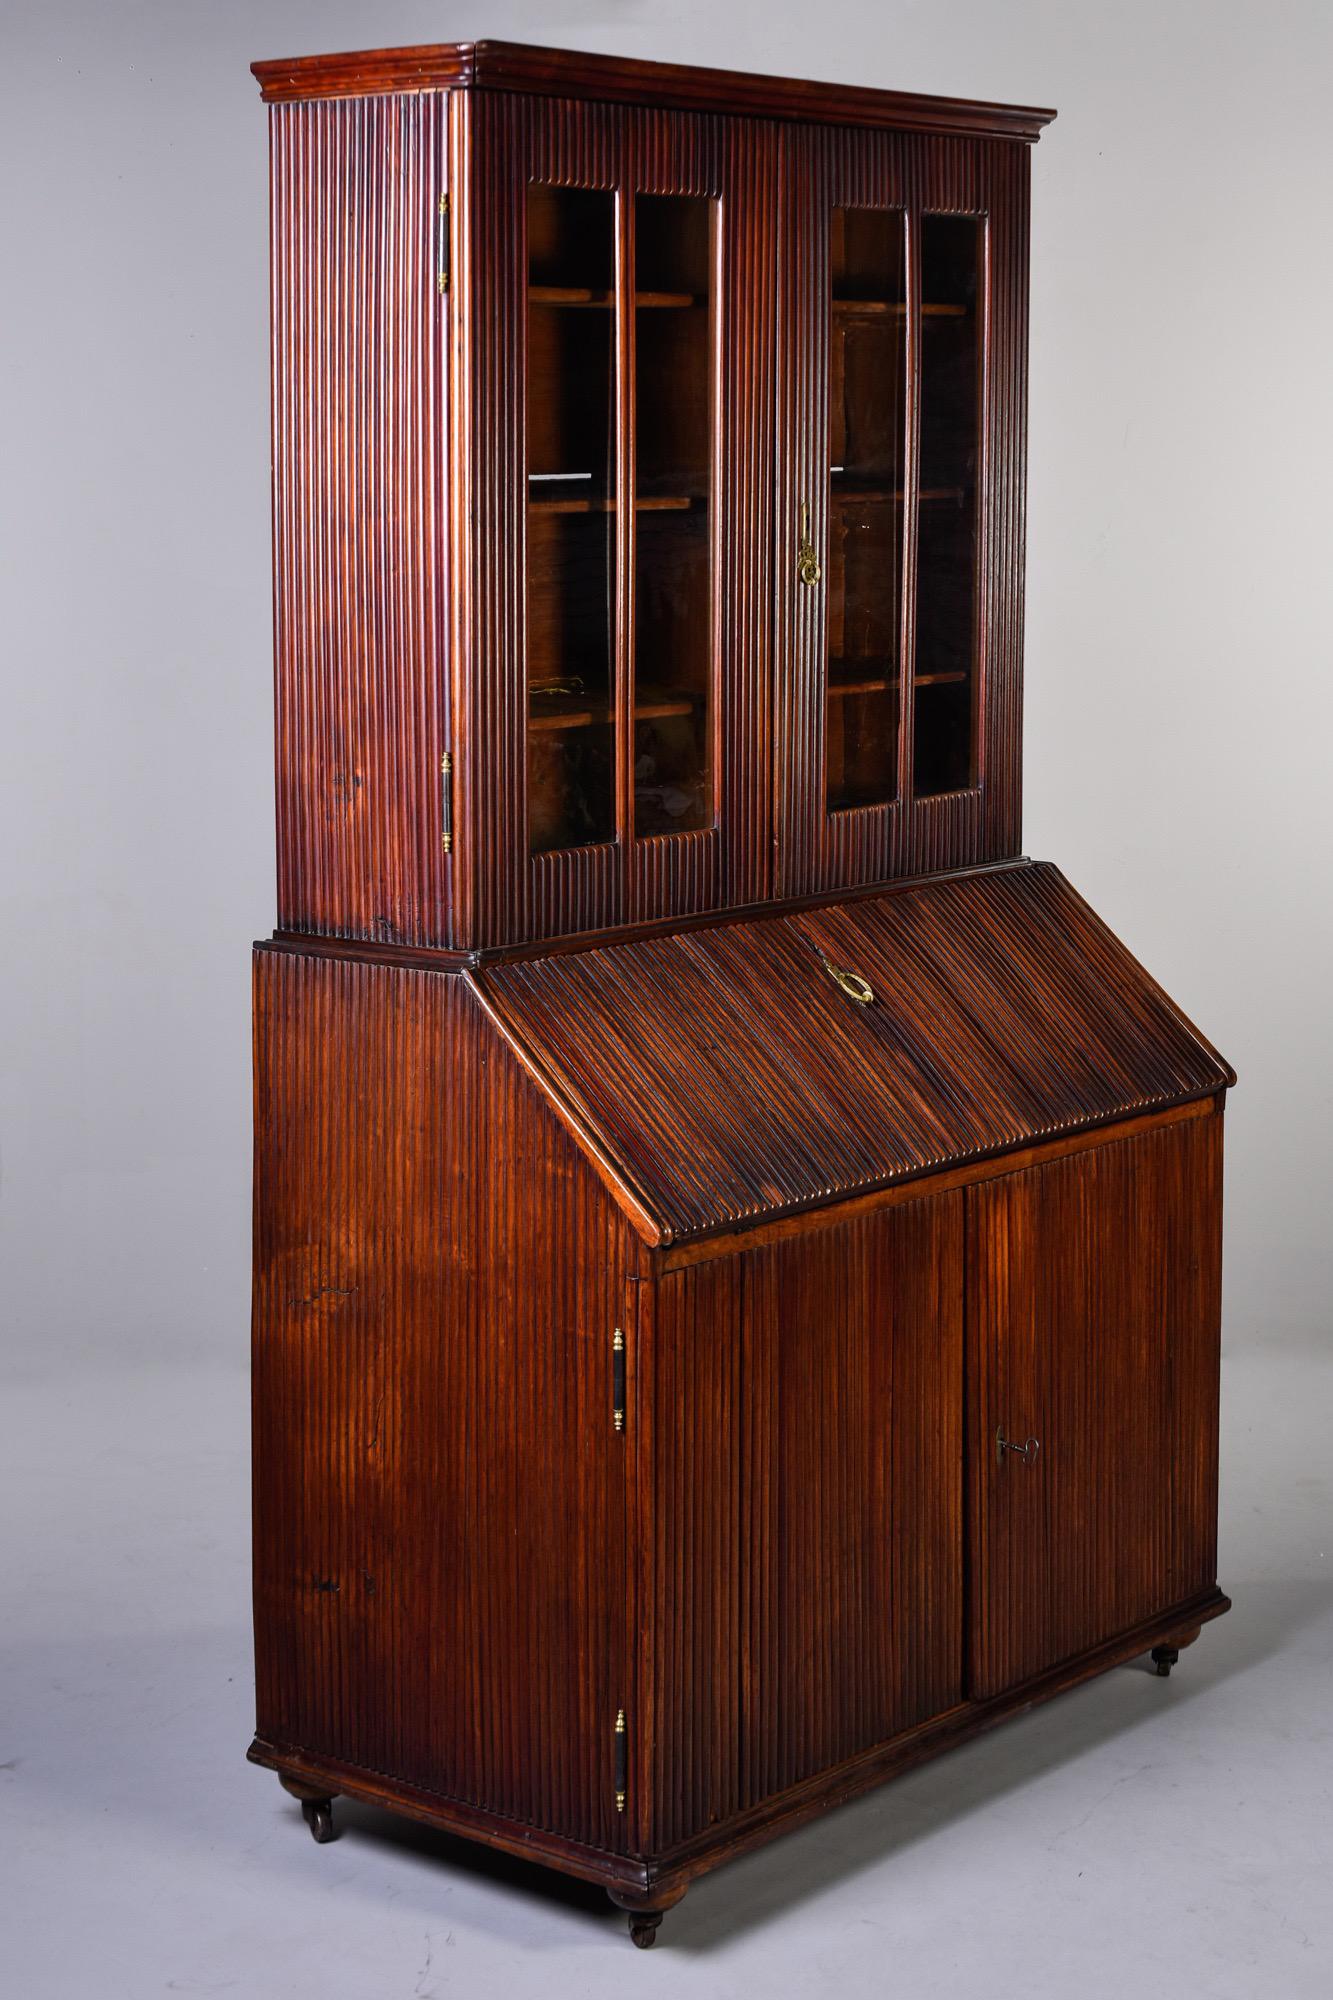 English cabinet features a reeded walnut base with fold down desk, internal shelves at the bottom, caster feet and glass-fronted book shelves on the top, circa 1850s. Unknown maker. Very good overall antique condition with crack on front of base and